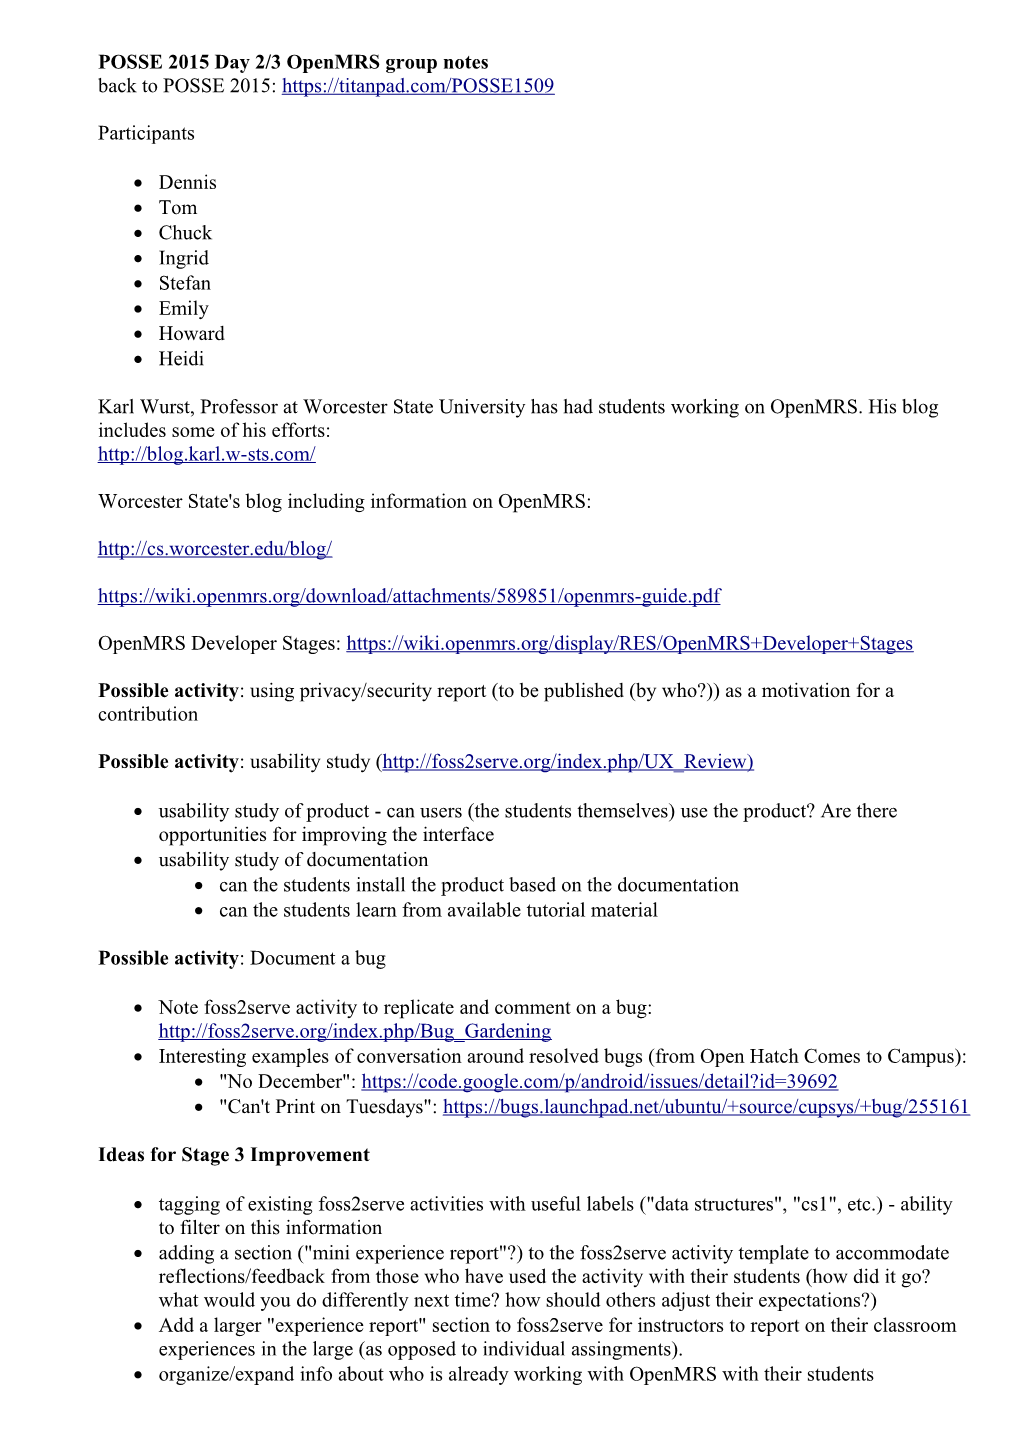 POSSE 2015 Day 2/3 Openmrs Group Notes Back to POSSE 2015: Participants